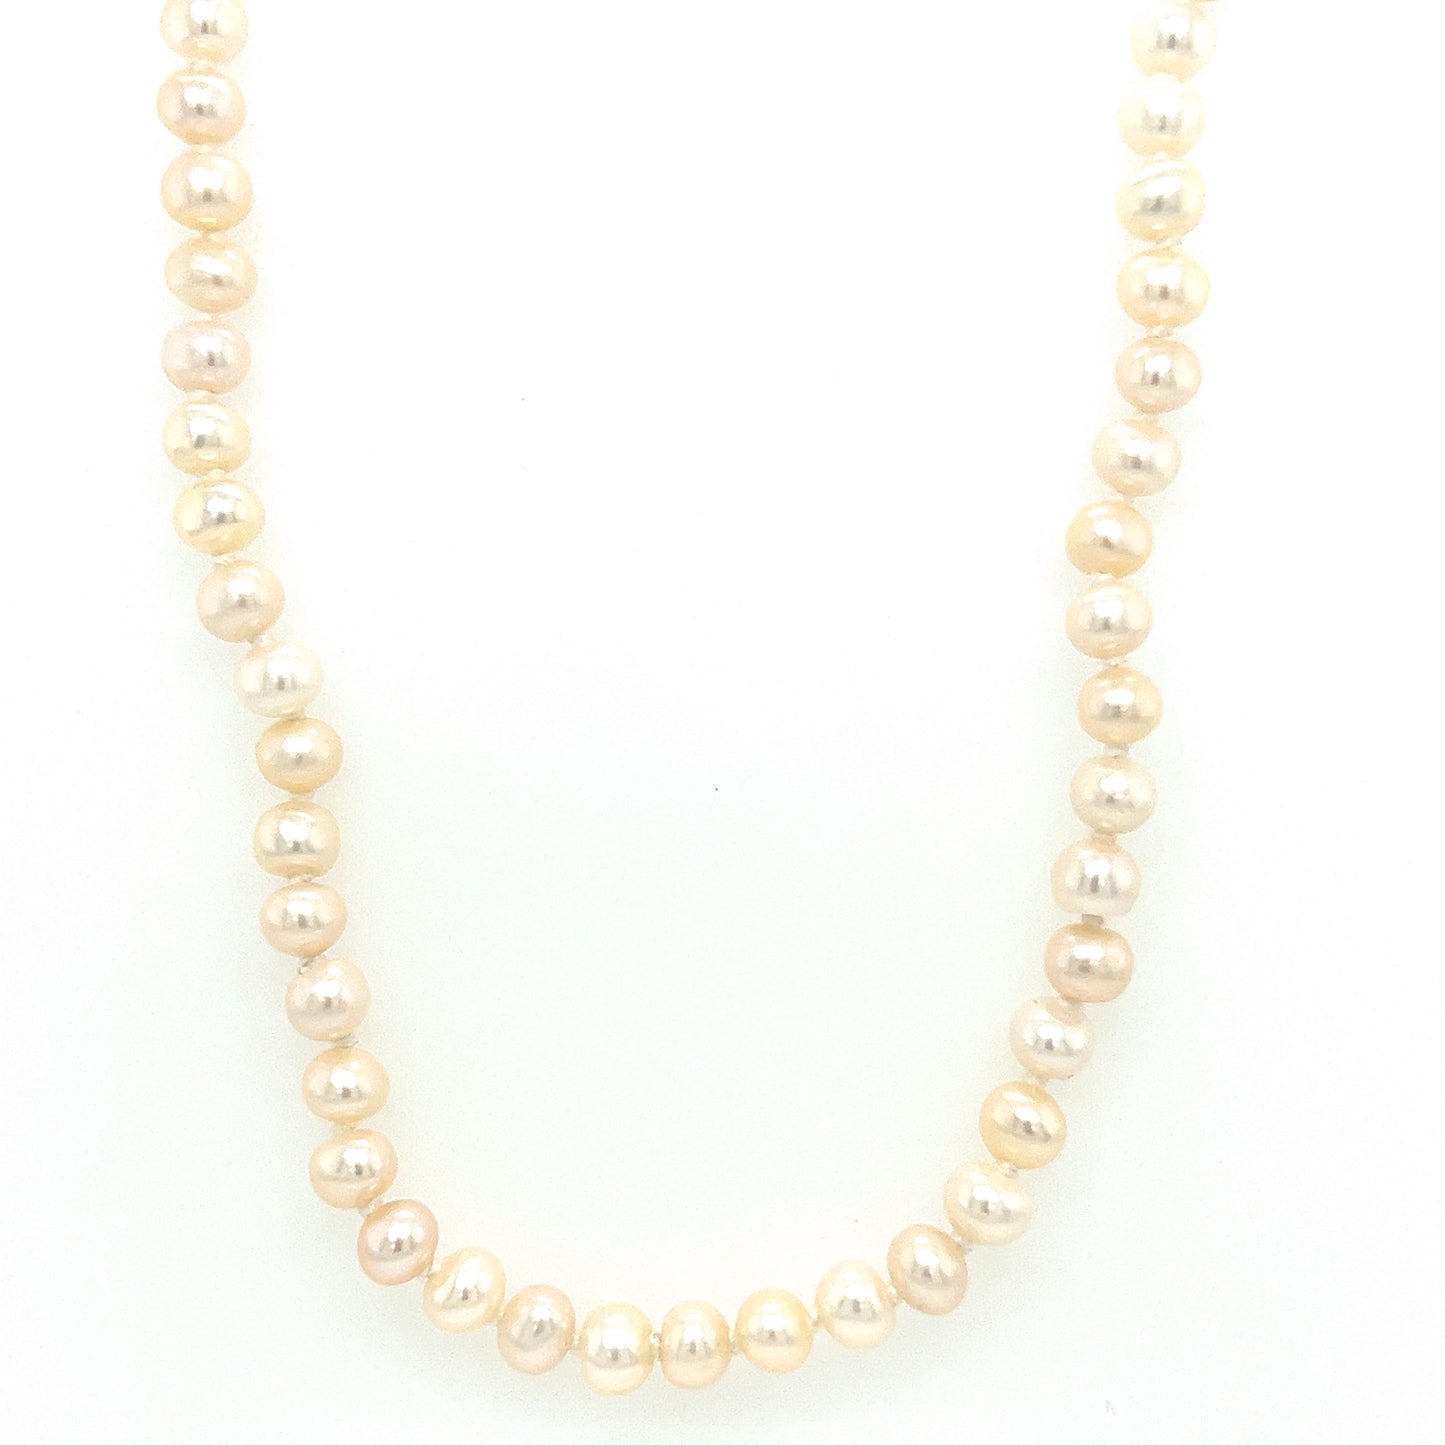 Cultured White Freshwater Pearl Necklace with 14K Yellow Gold Clasp